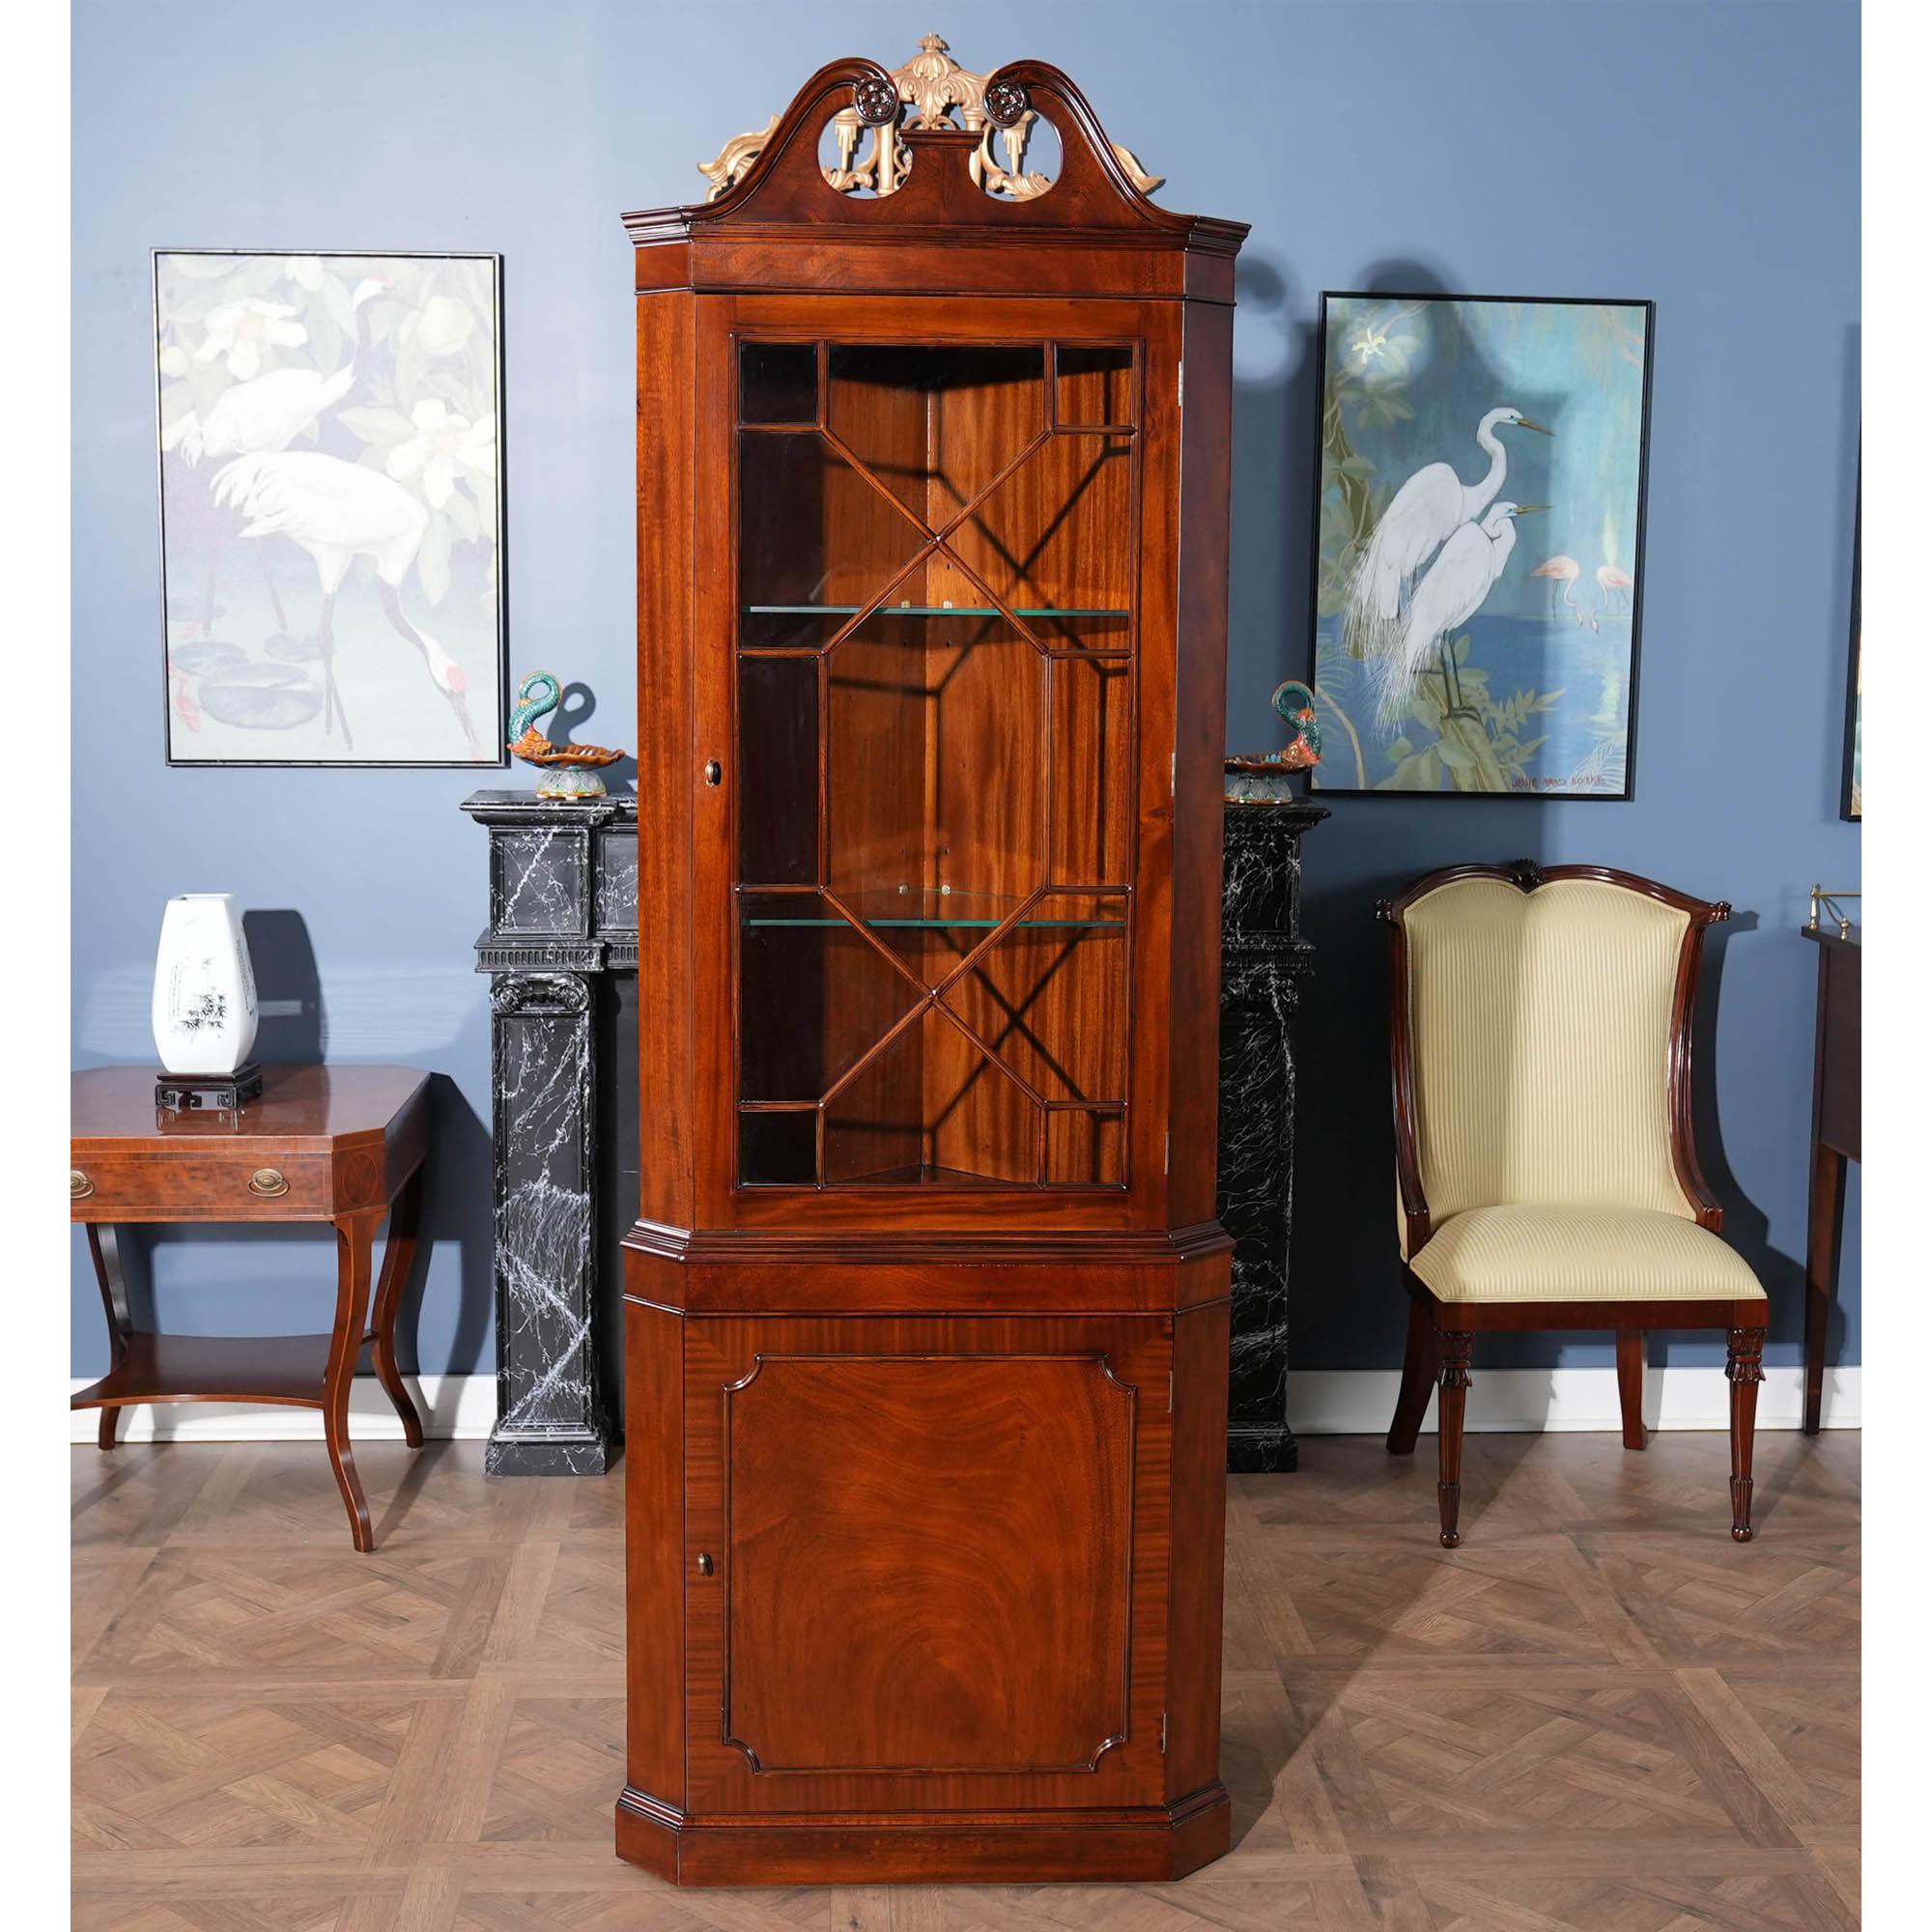 Mahogany Corner Cabinet In New Condition For Sale In Annville, PA